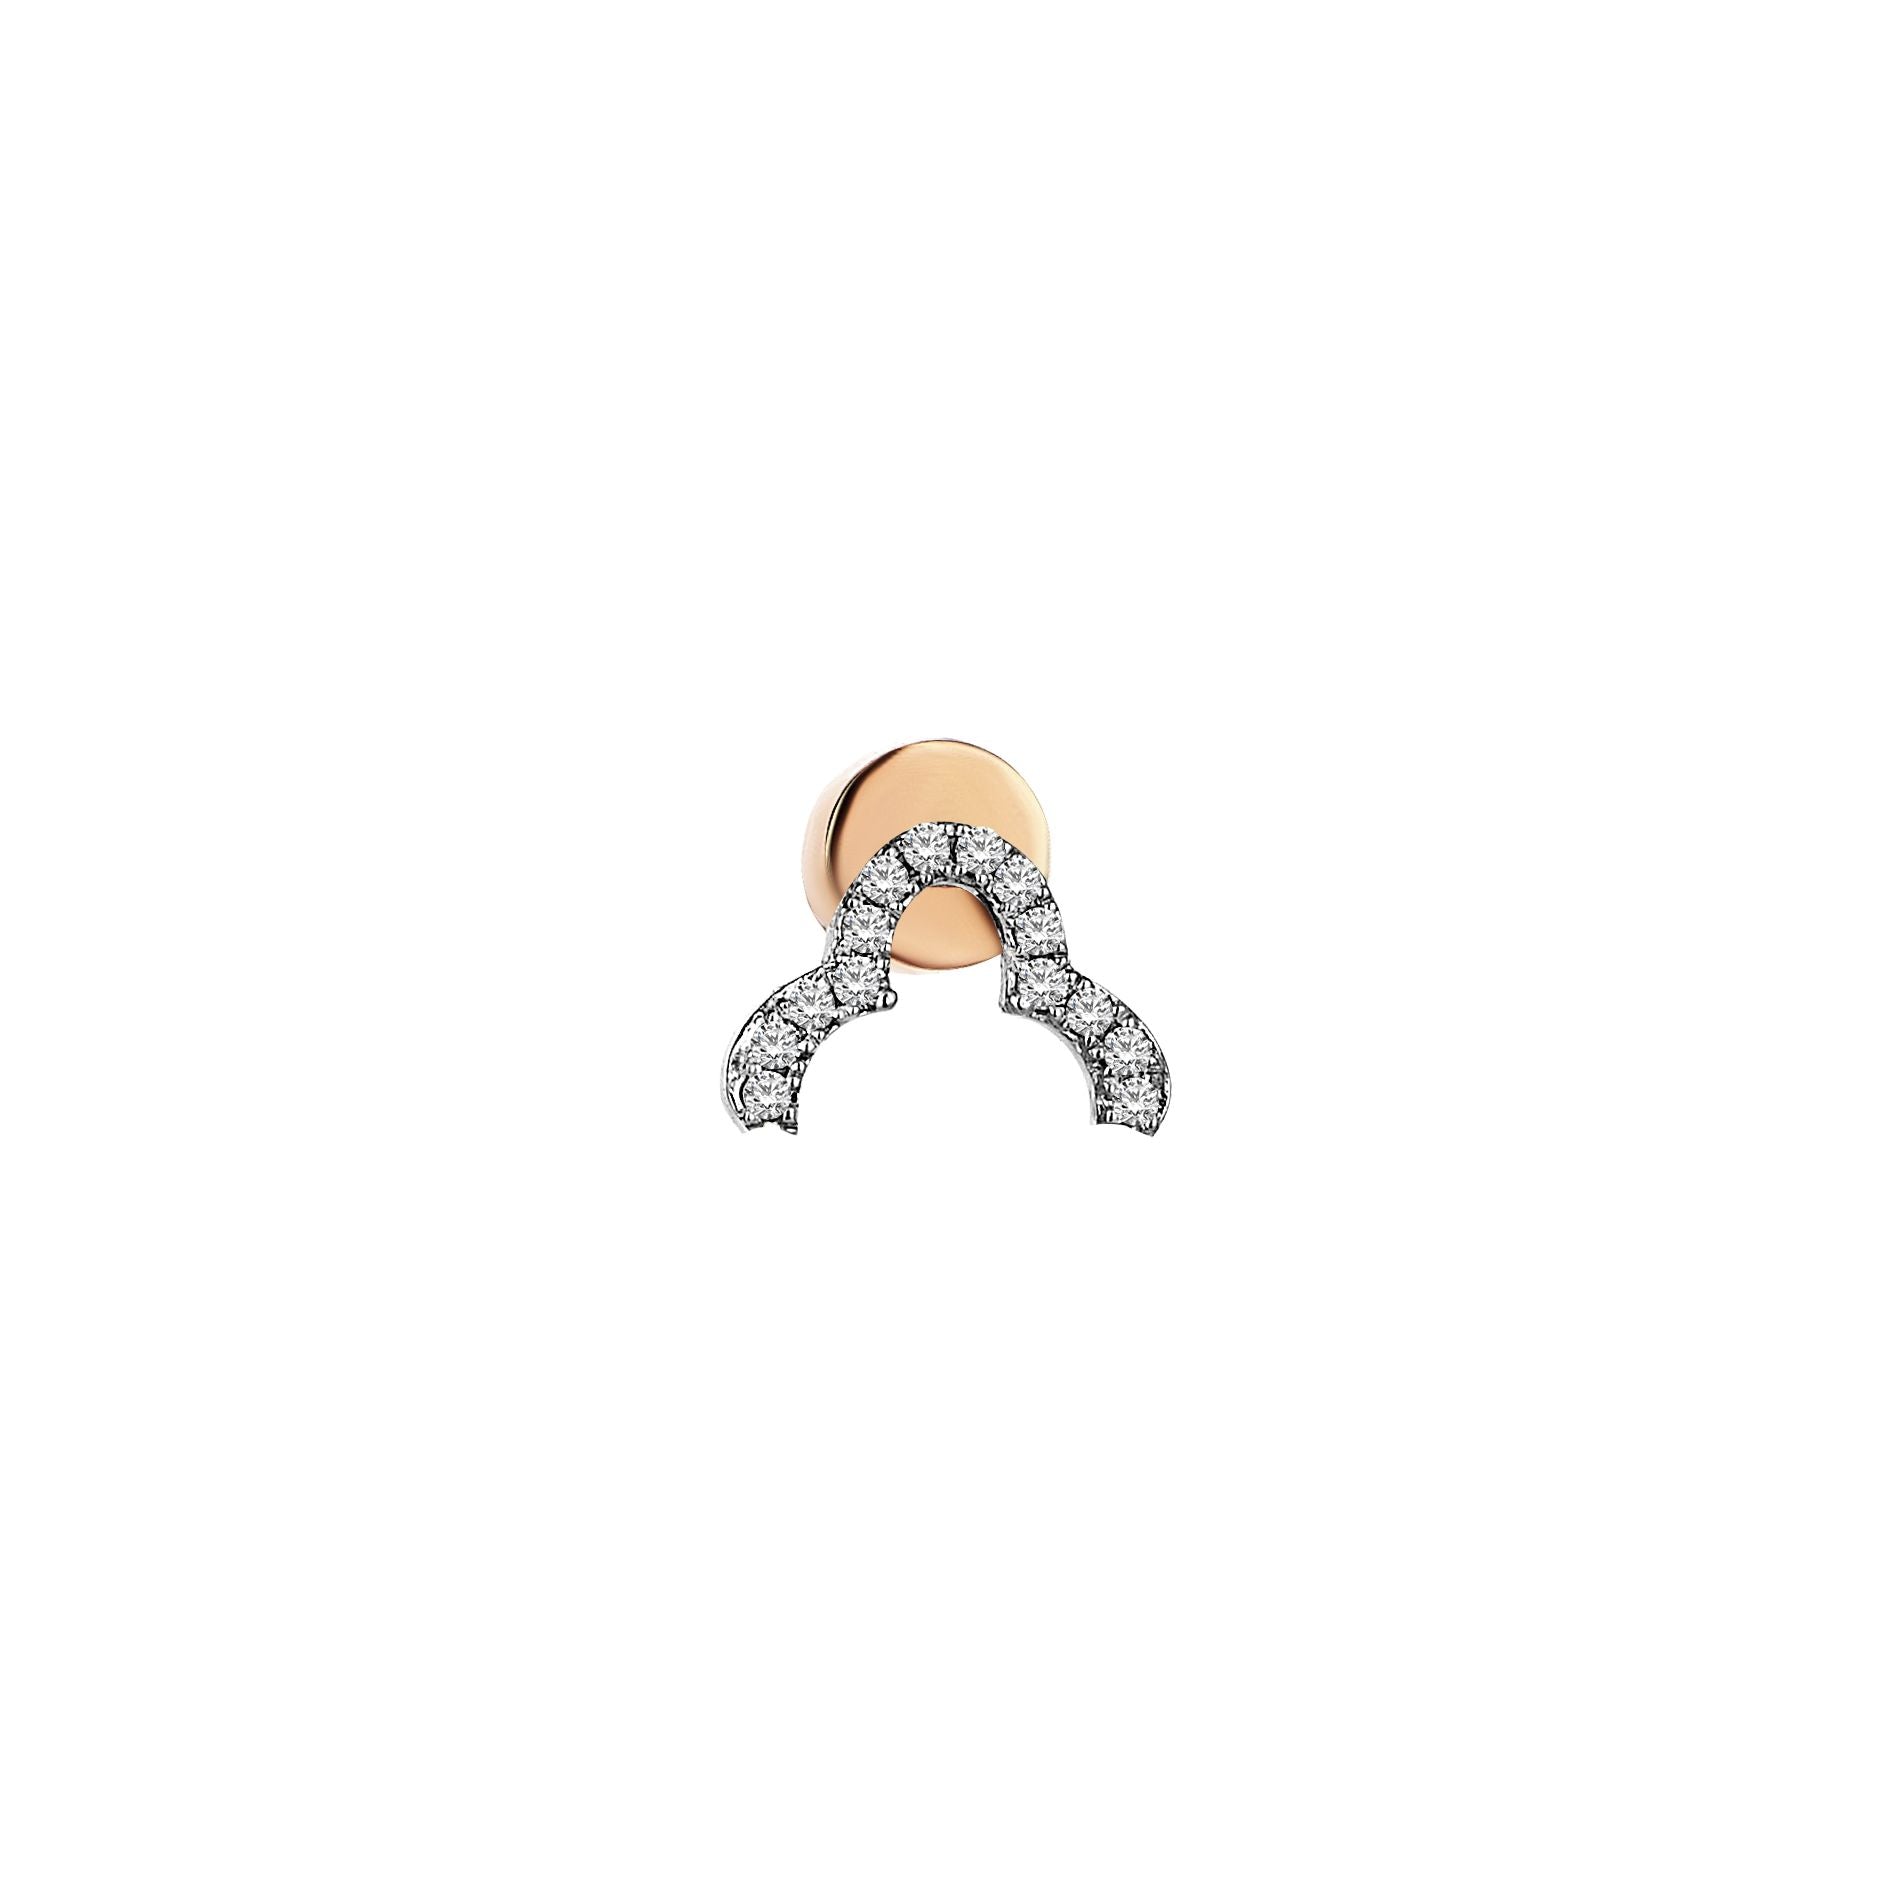 Round Trefoil Arch Earring in Rose Gold - Her Story Shop